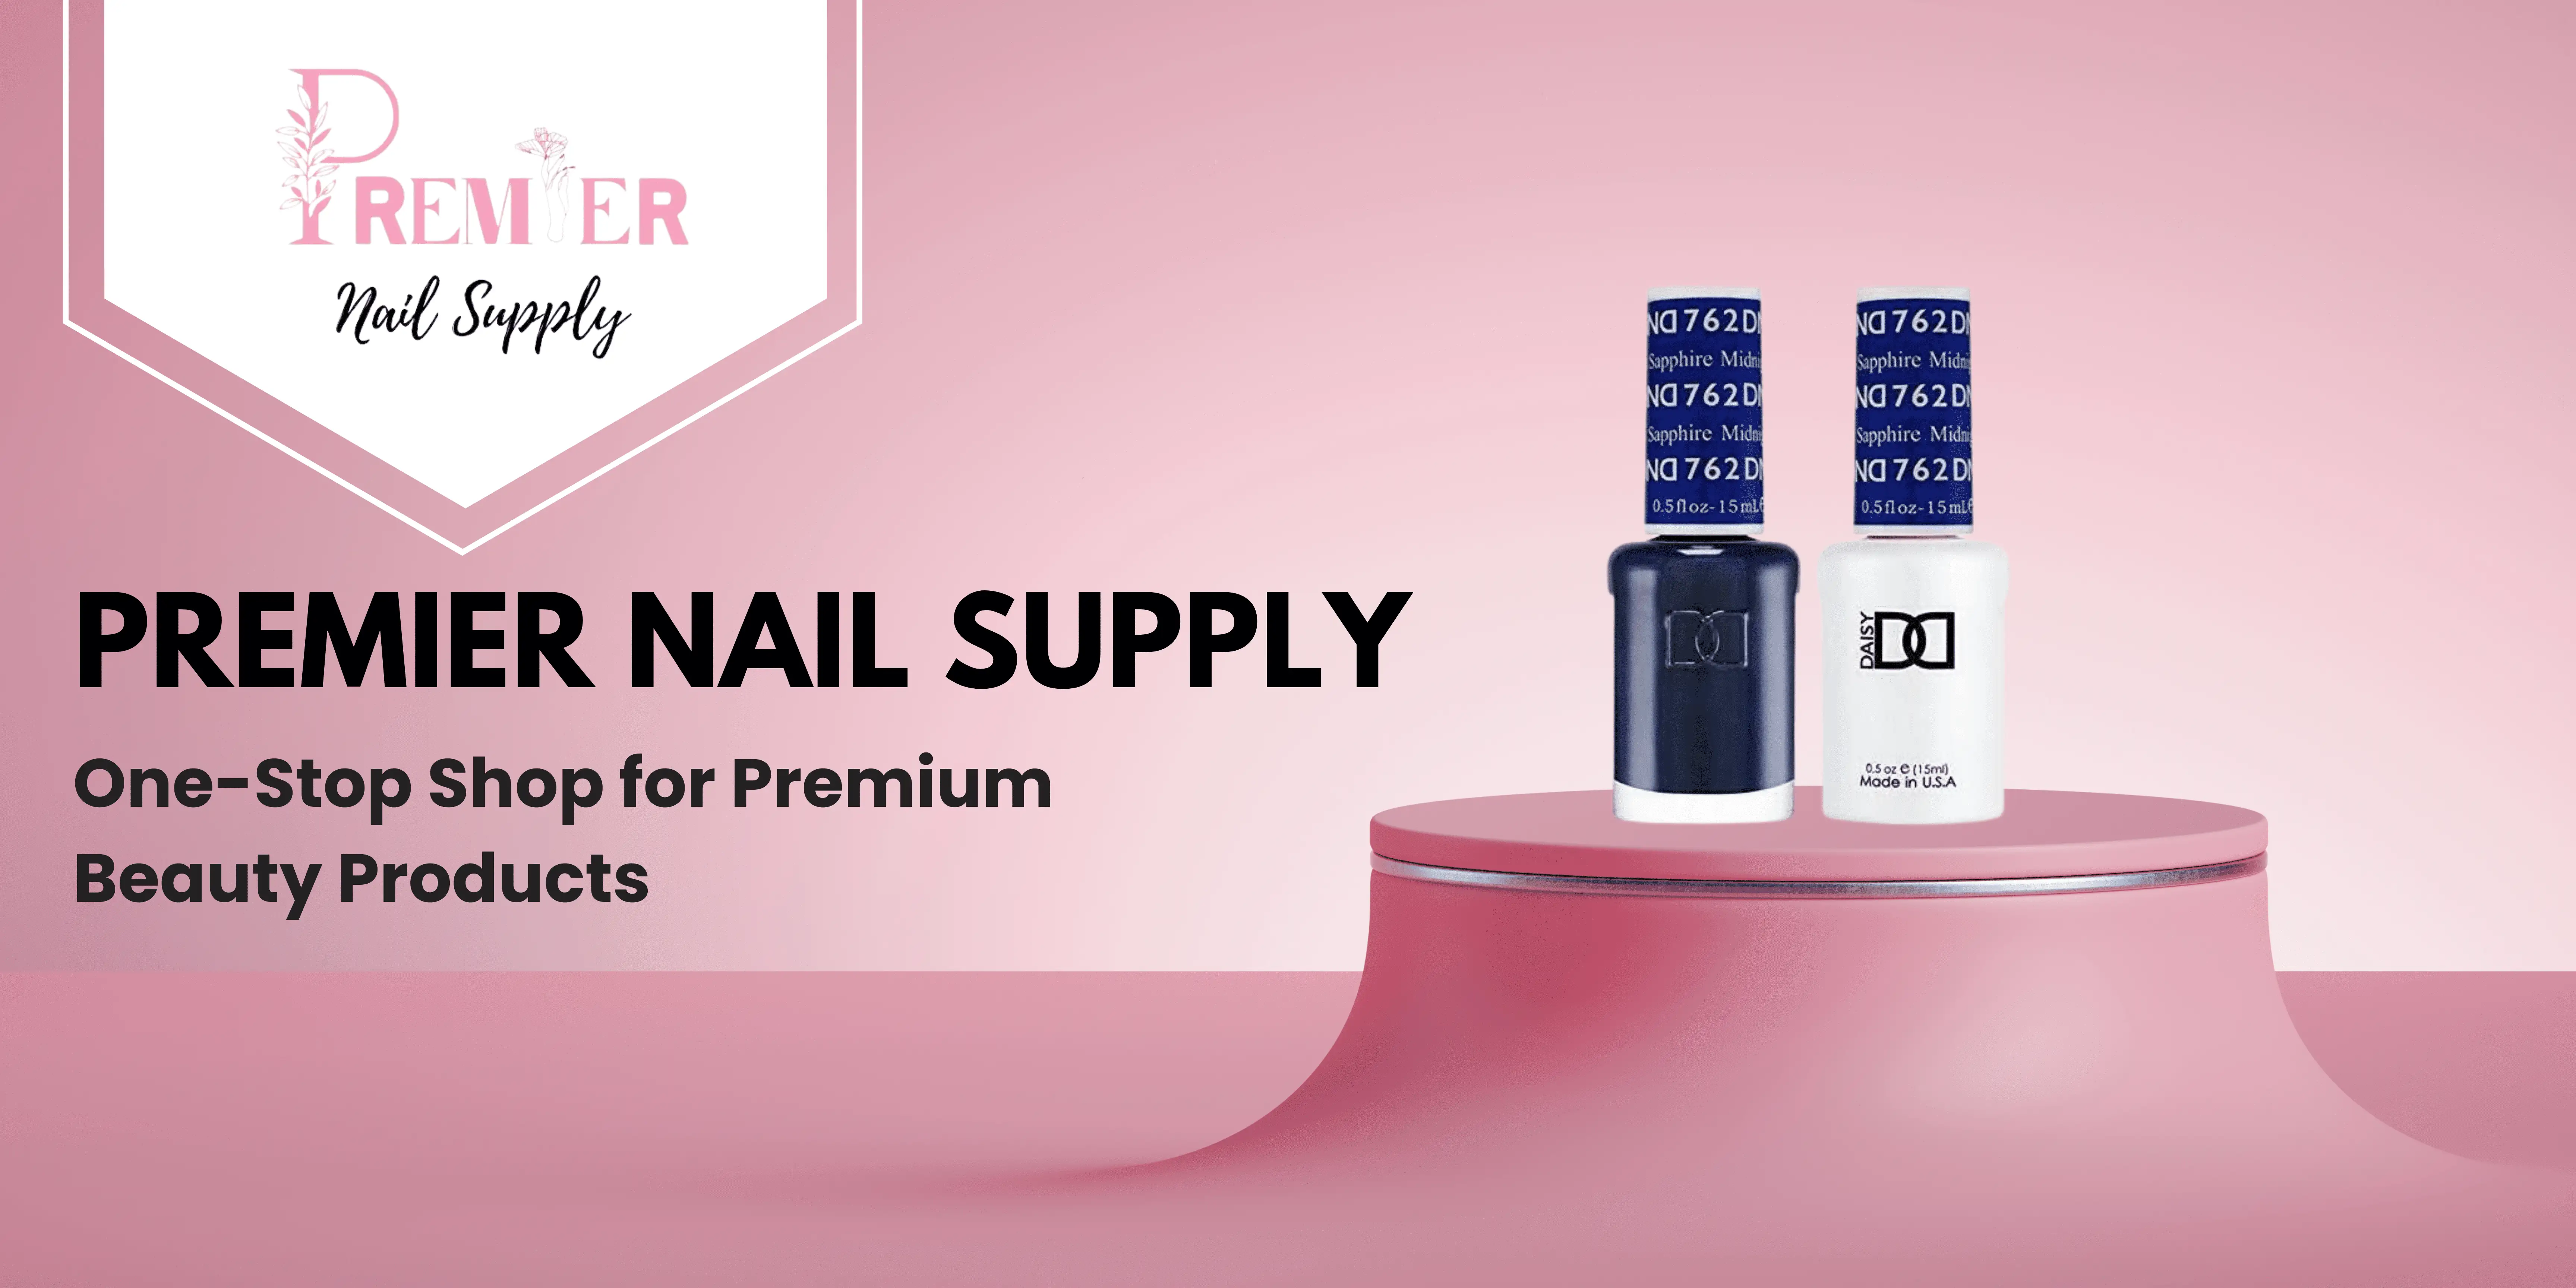 Title: PremierNailSupply: Your One-Stop Shop for Premium Beauty Products